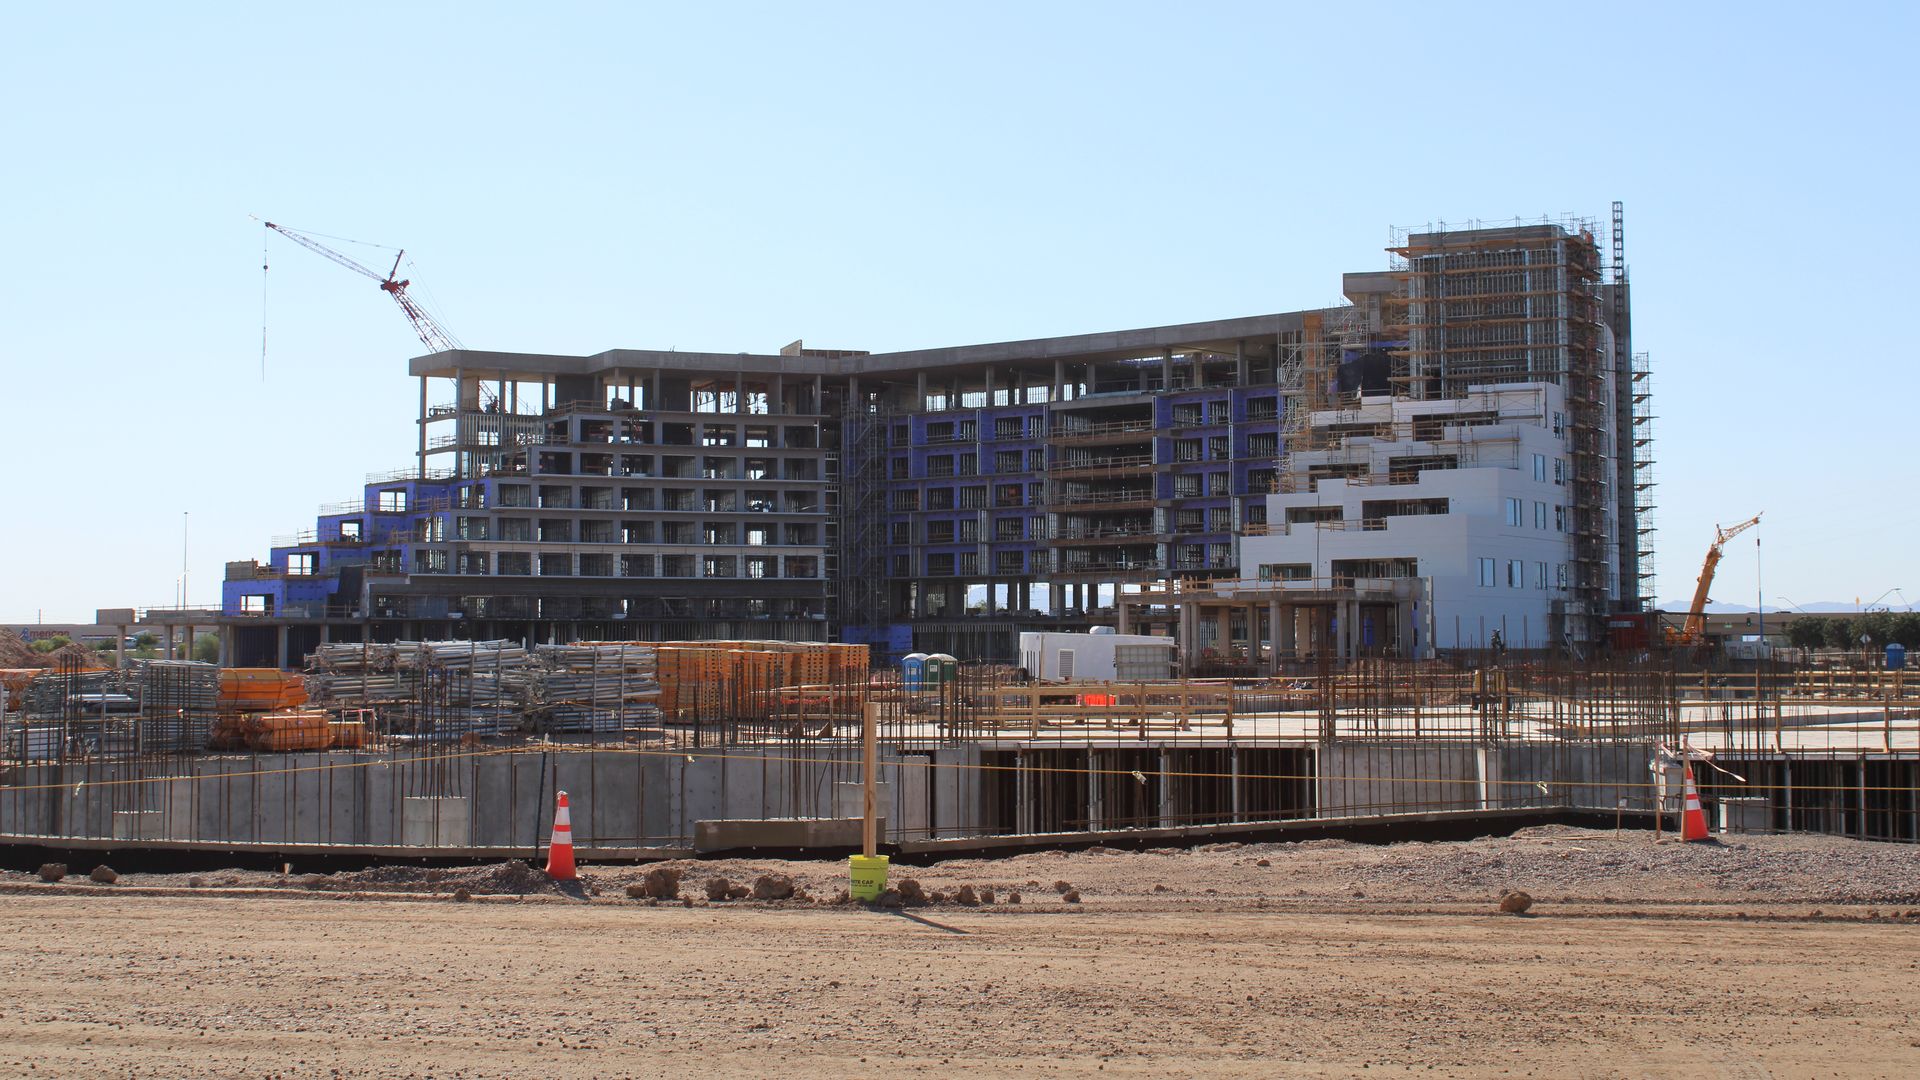 A partially completed hotel and resort that is under construction